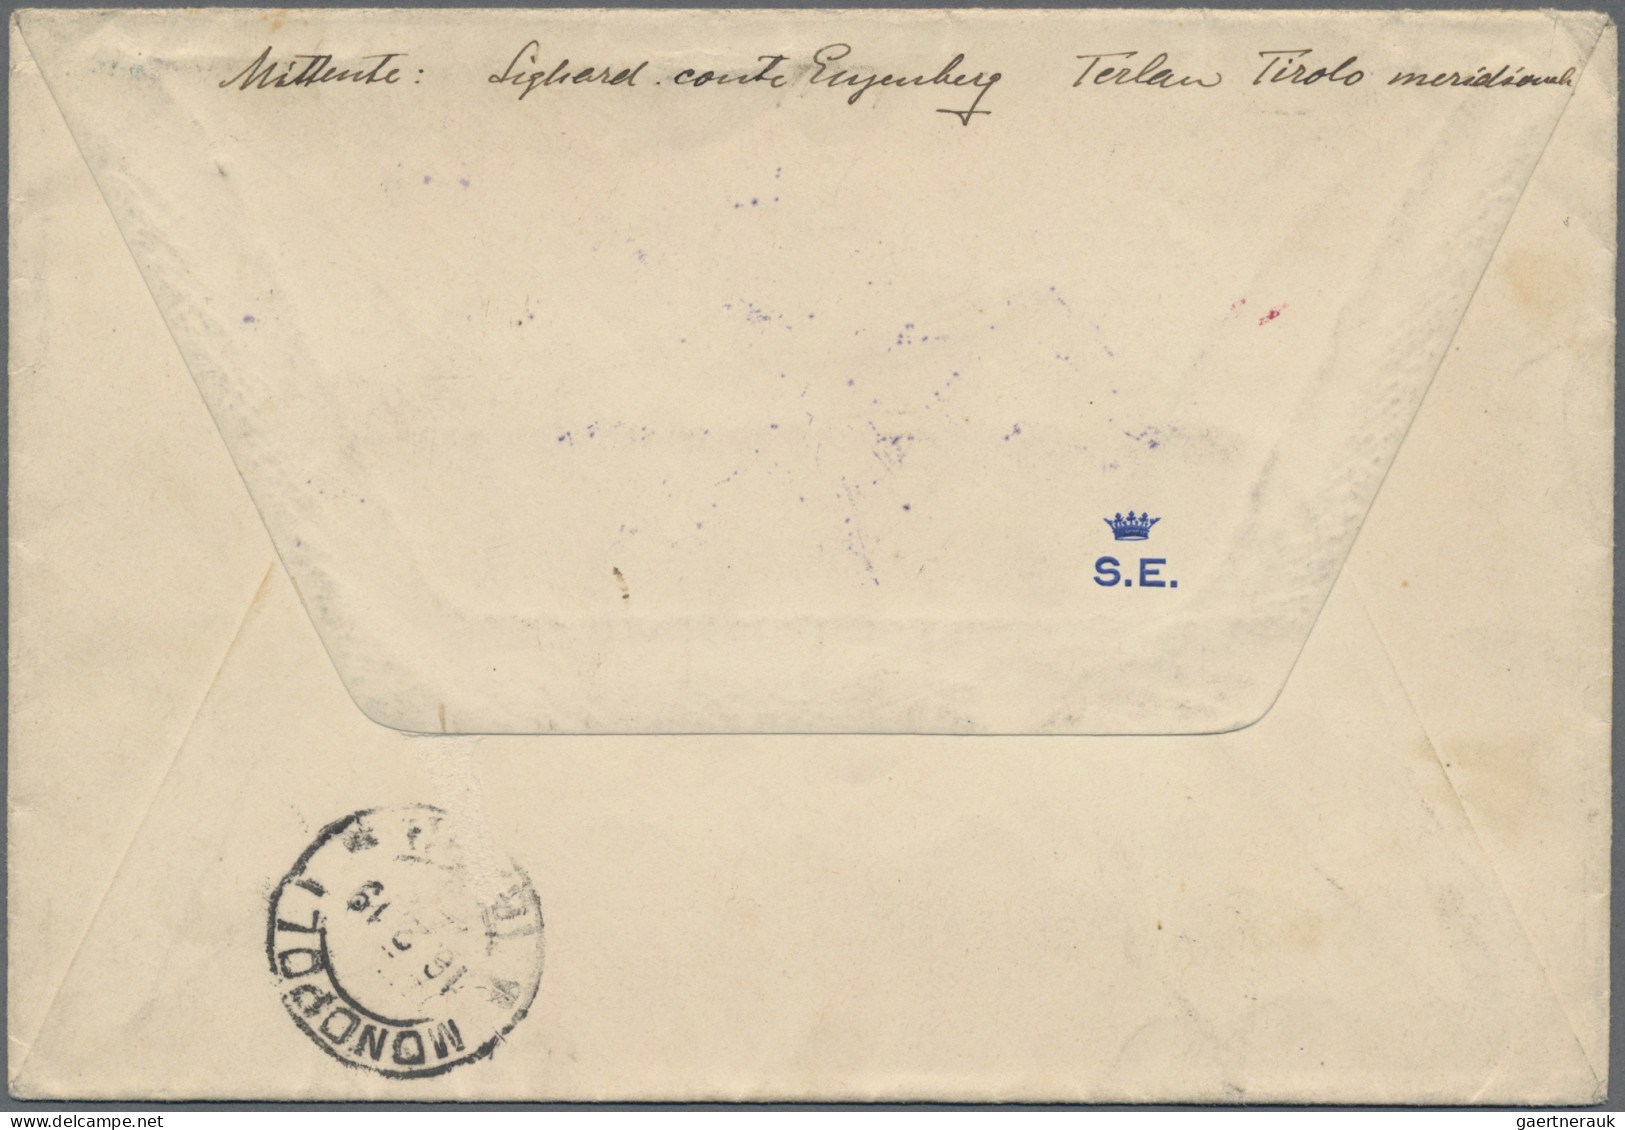 Italy: 1919, group of 4 registered covers: 10 C rose and 2 x 25 C blue, tied by